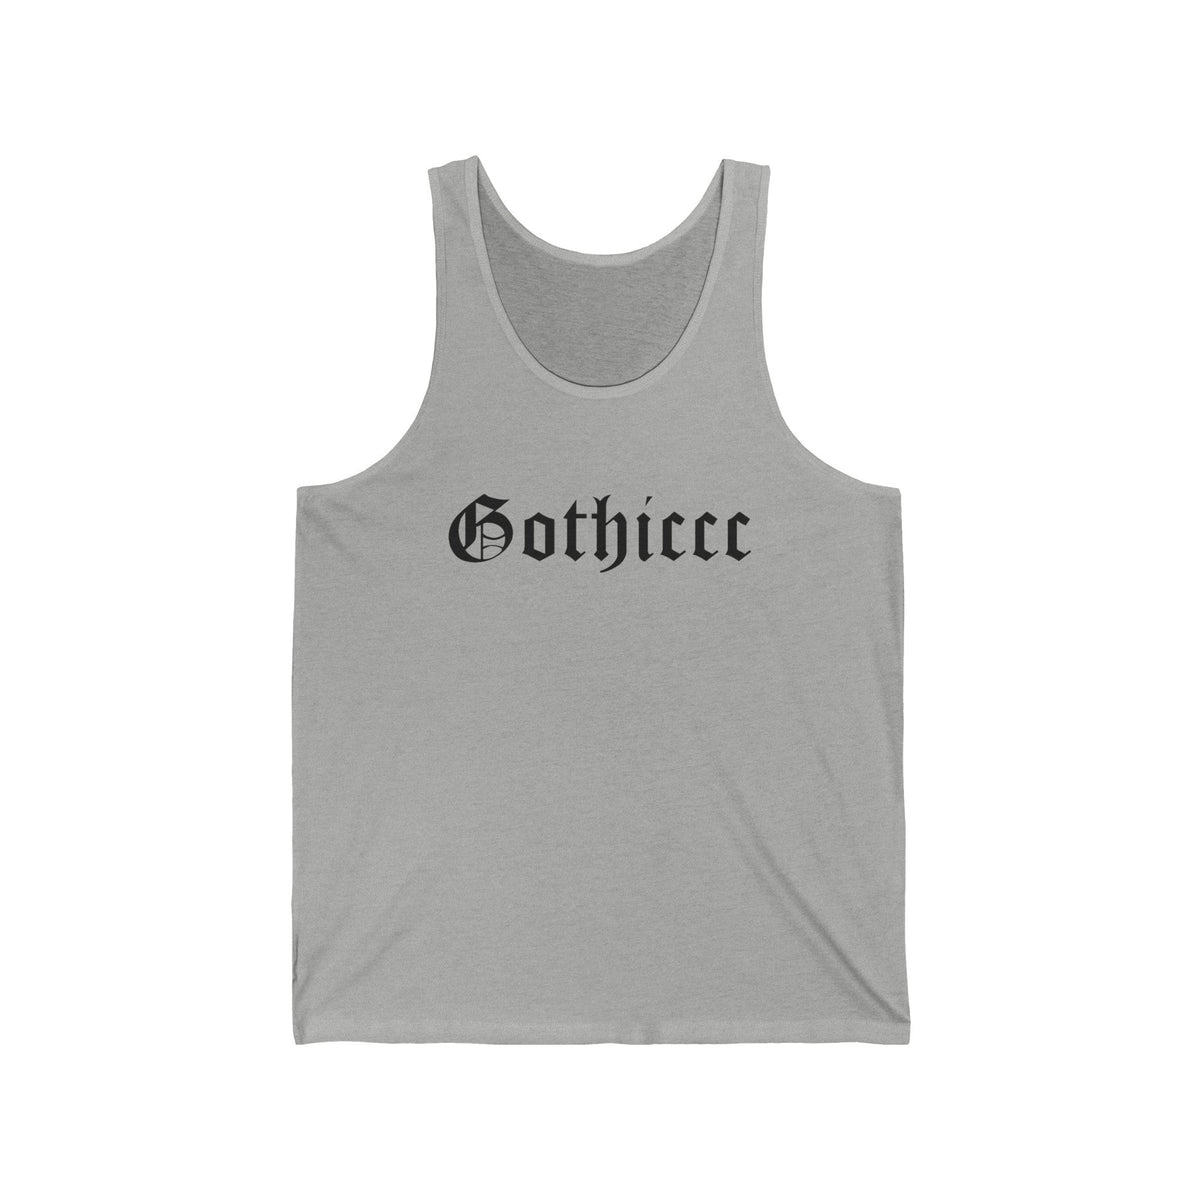 Gothiccc Unisex Jersey Tank - Goth Cloth Co.Tank Top21494947639096415713